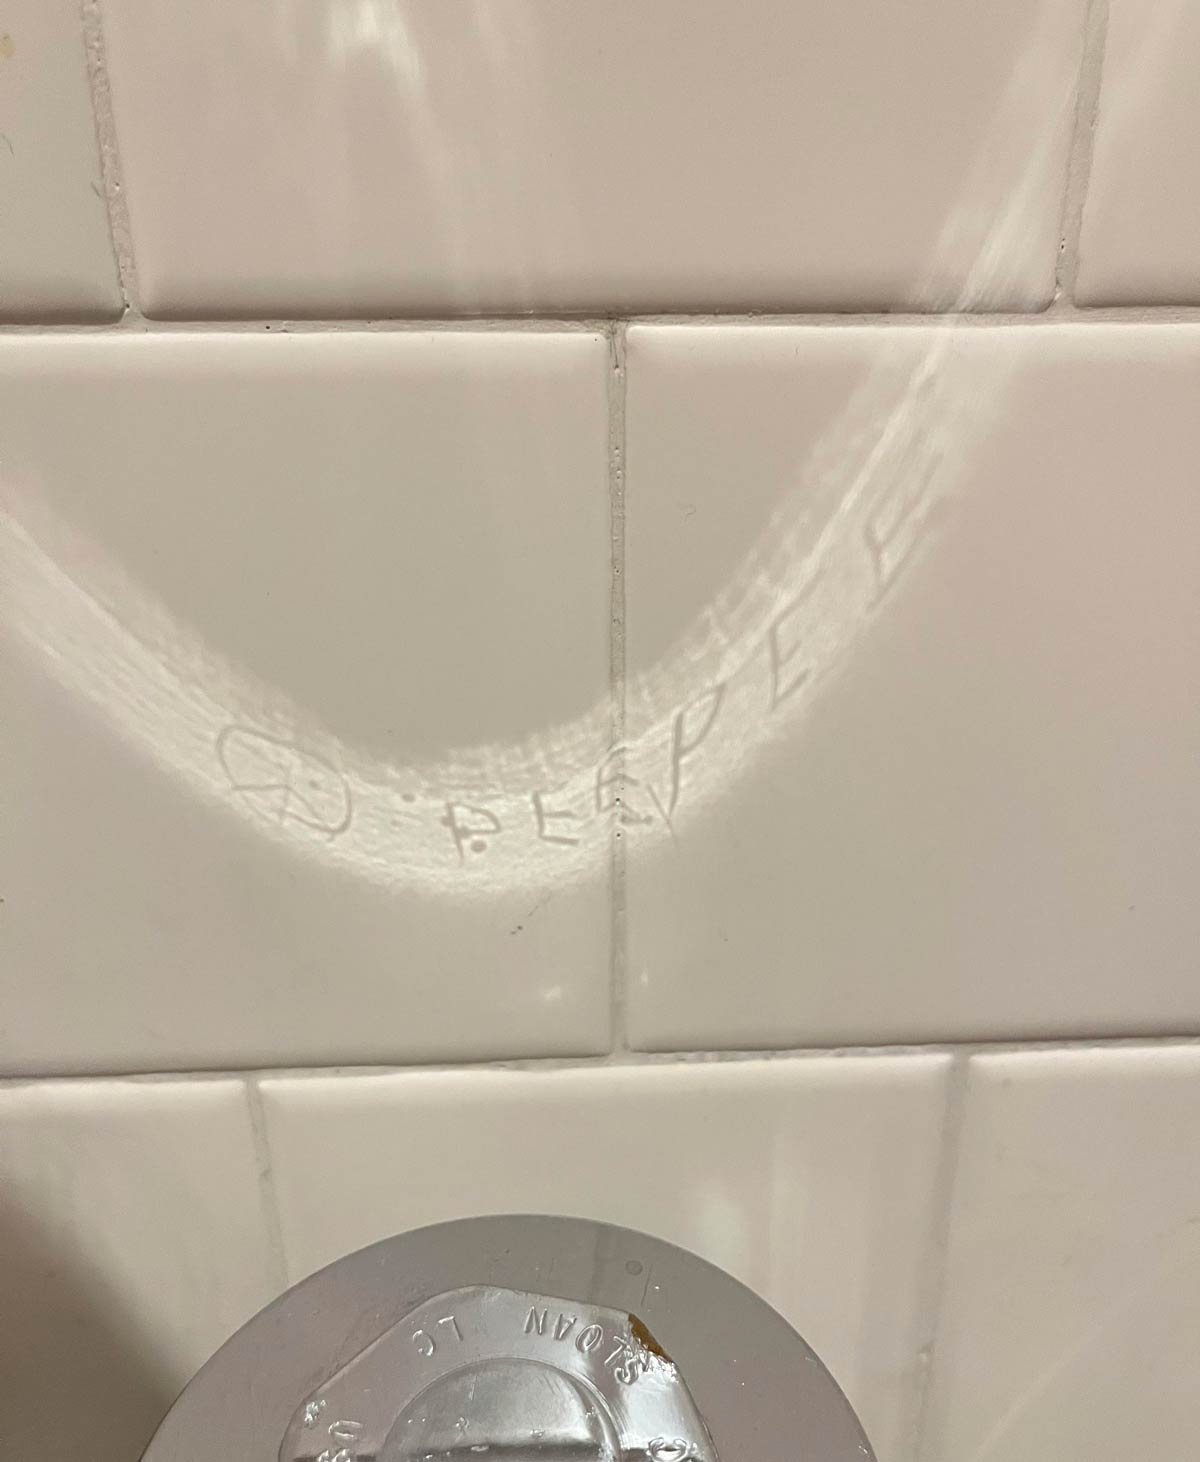 Someone engraved “peepee” backwards on this urinal so when the light hits it it projects “peepee” on the wall!